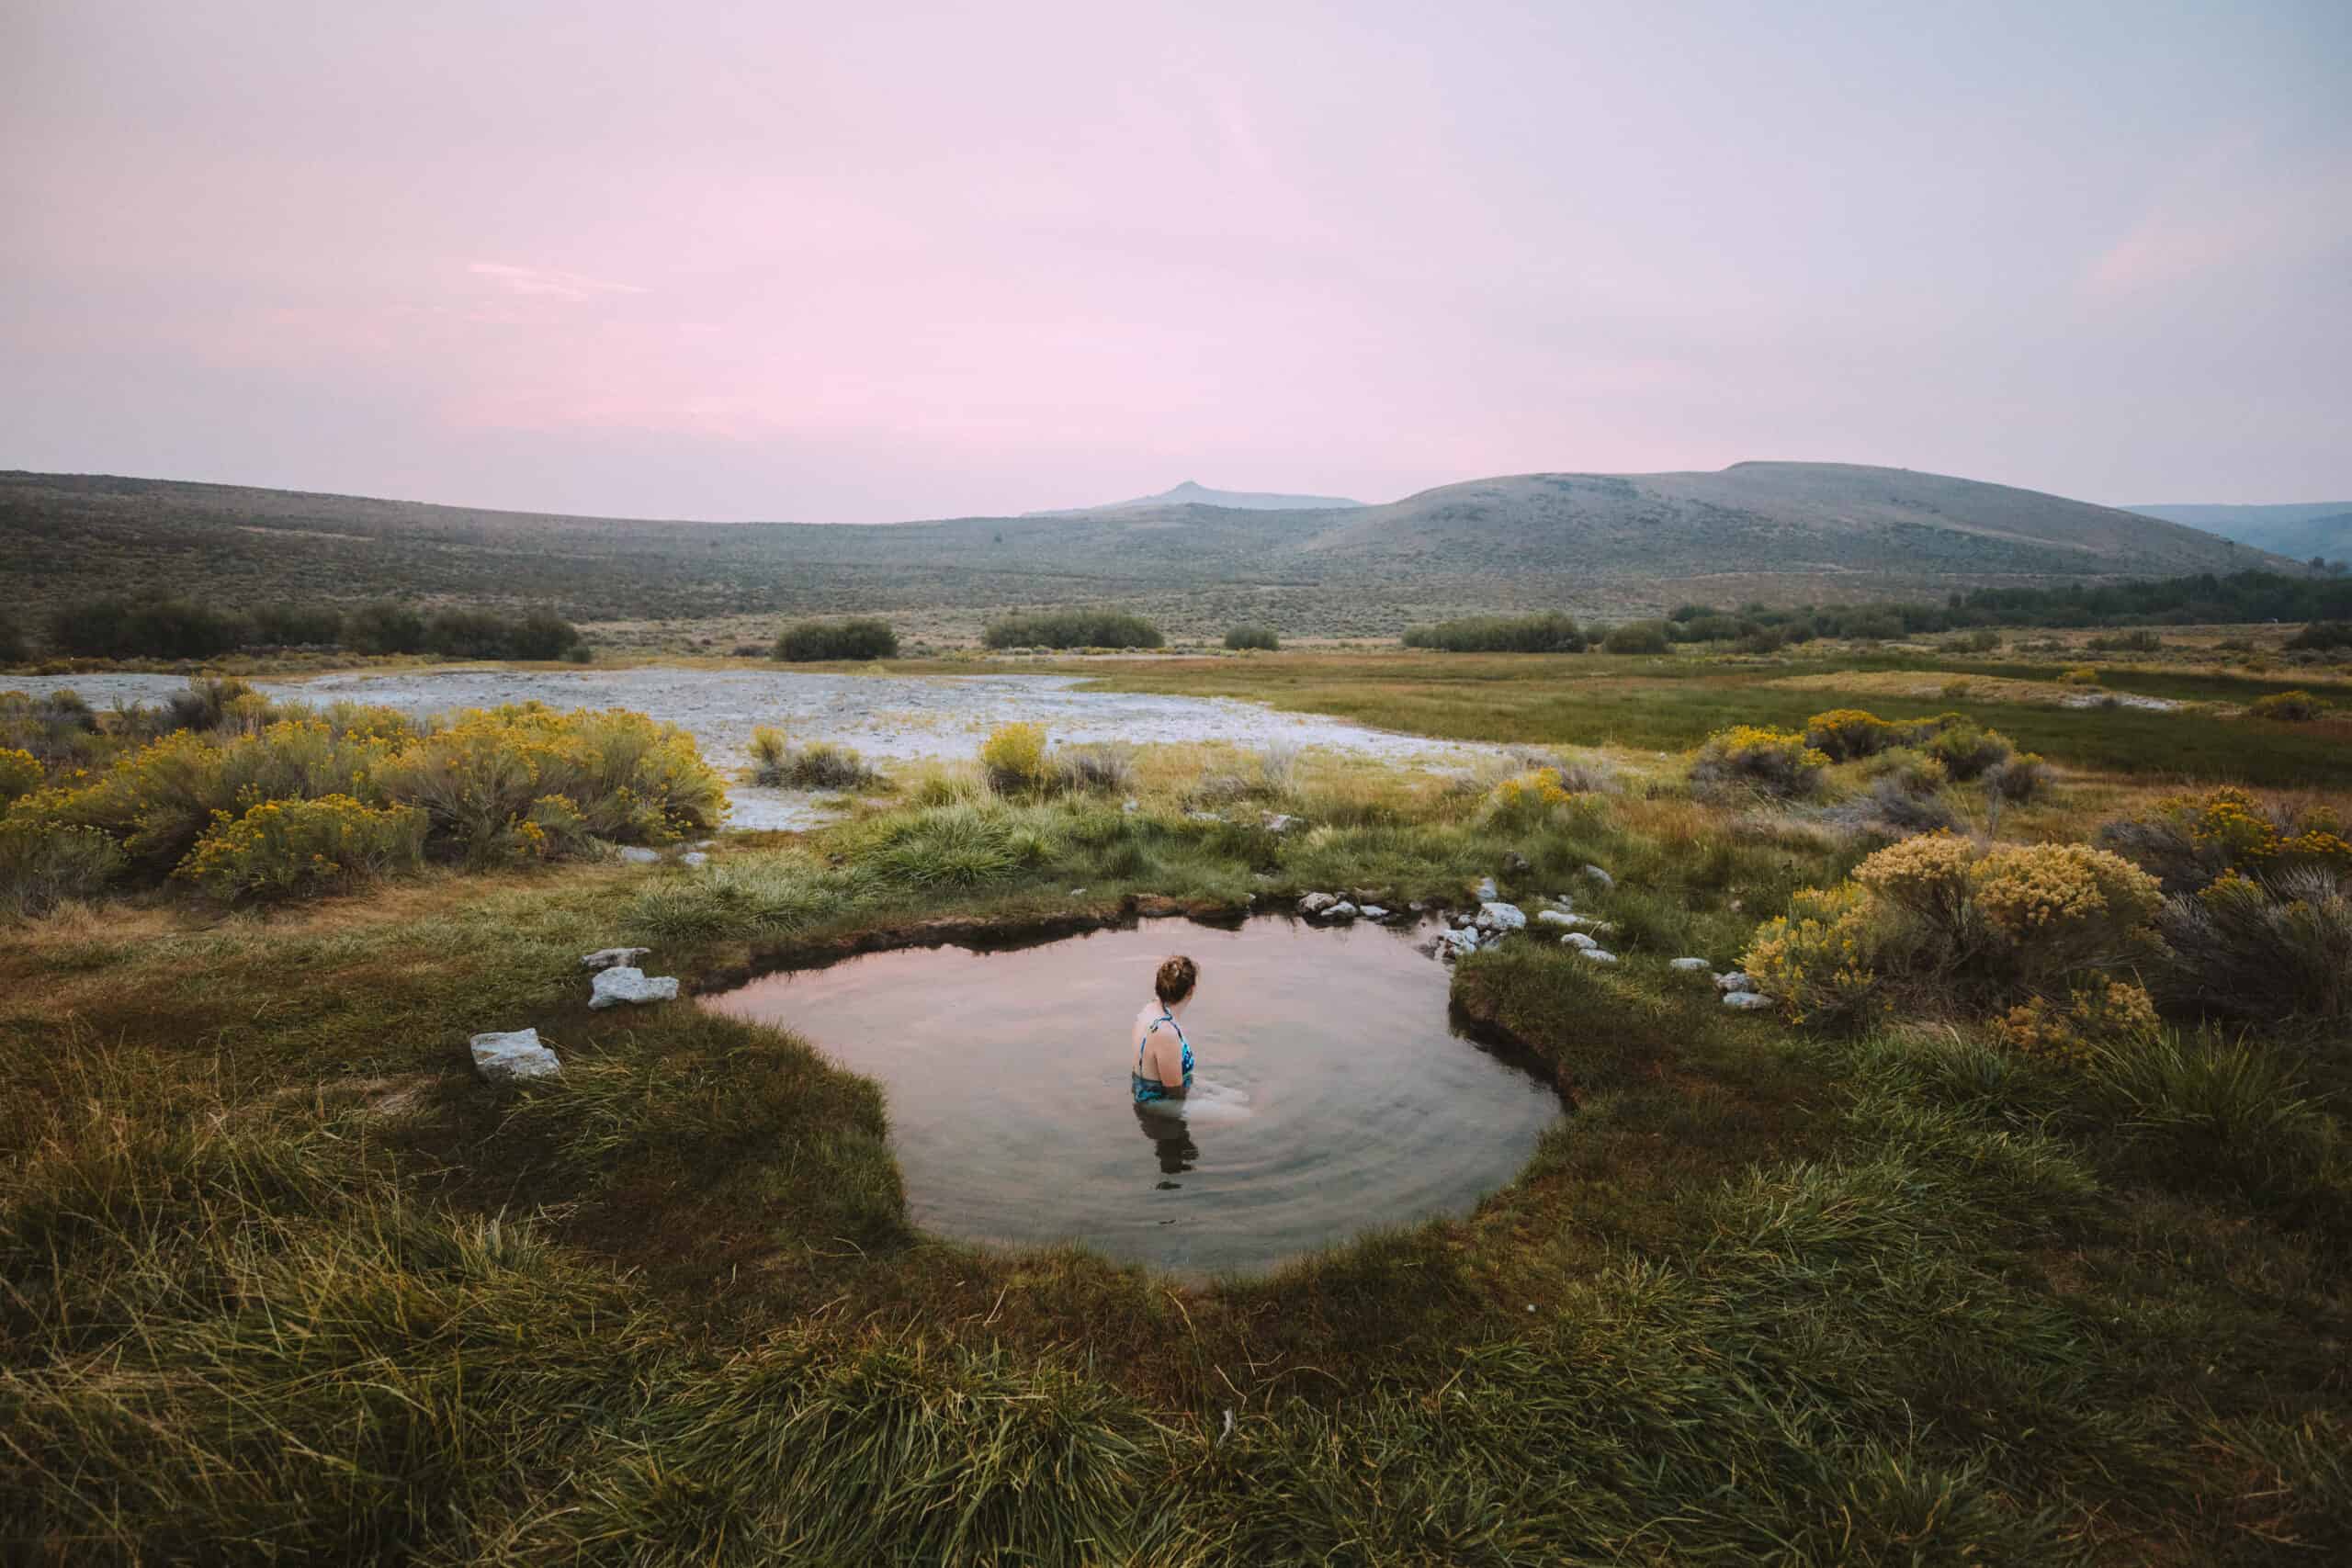 The Ultimate Guide To Hart Mountain Hot Springs (Directions, Things To Do, and Photo Tips!)